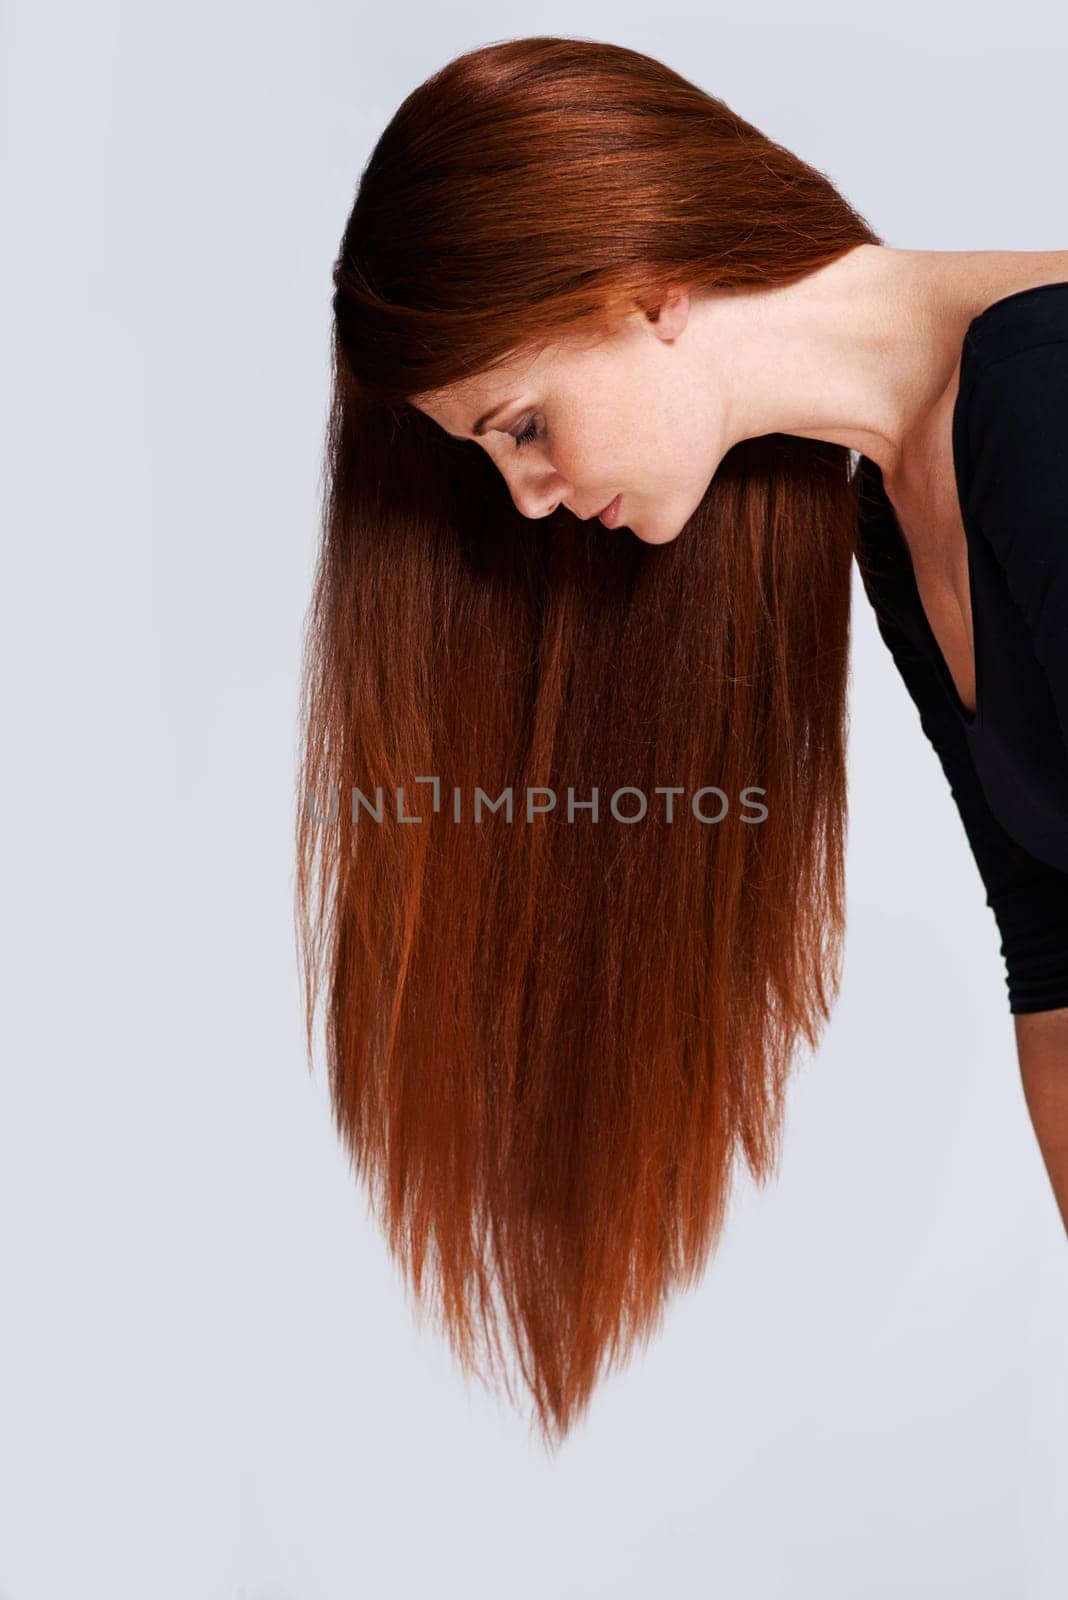 Woman, red hair and beauty with cosmetic care, keratin treatment for shine with healthy growth on white background. Redhead, ginger and haircare for wellness, volume and texture with length in studio.